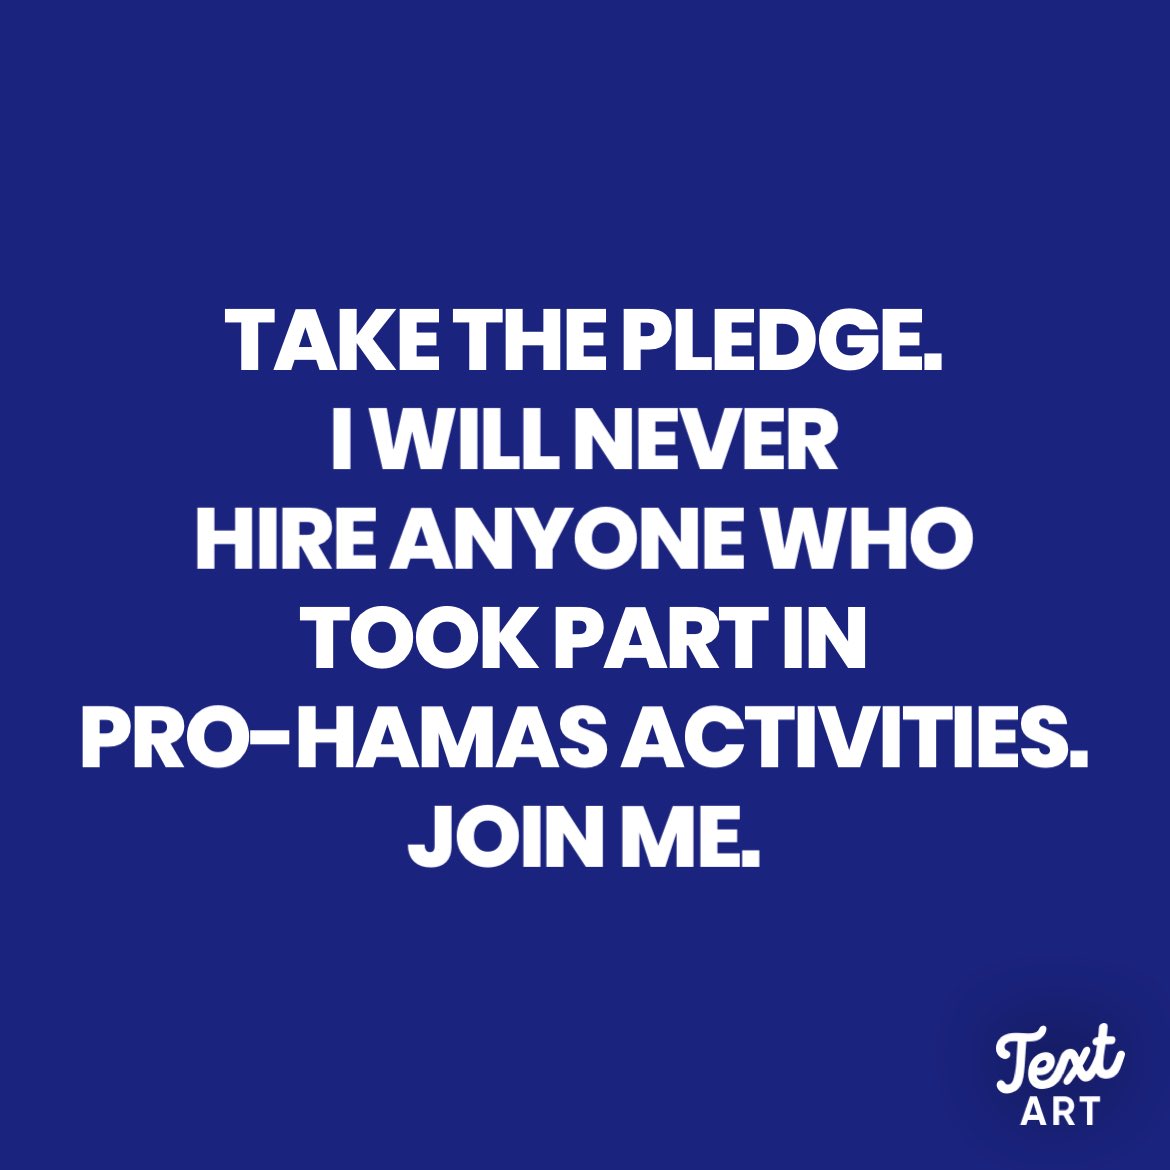 If you are a pro Hamas protester, do not ask me for a job. I will check your social media accounts and you will not be hired. I will not bring Jew haters into my practice. Your parents are throwing away their tuition dollars.